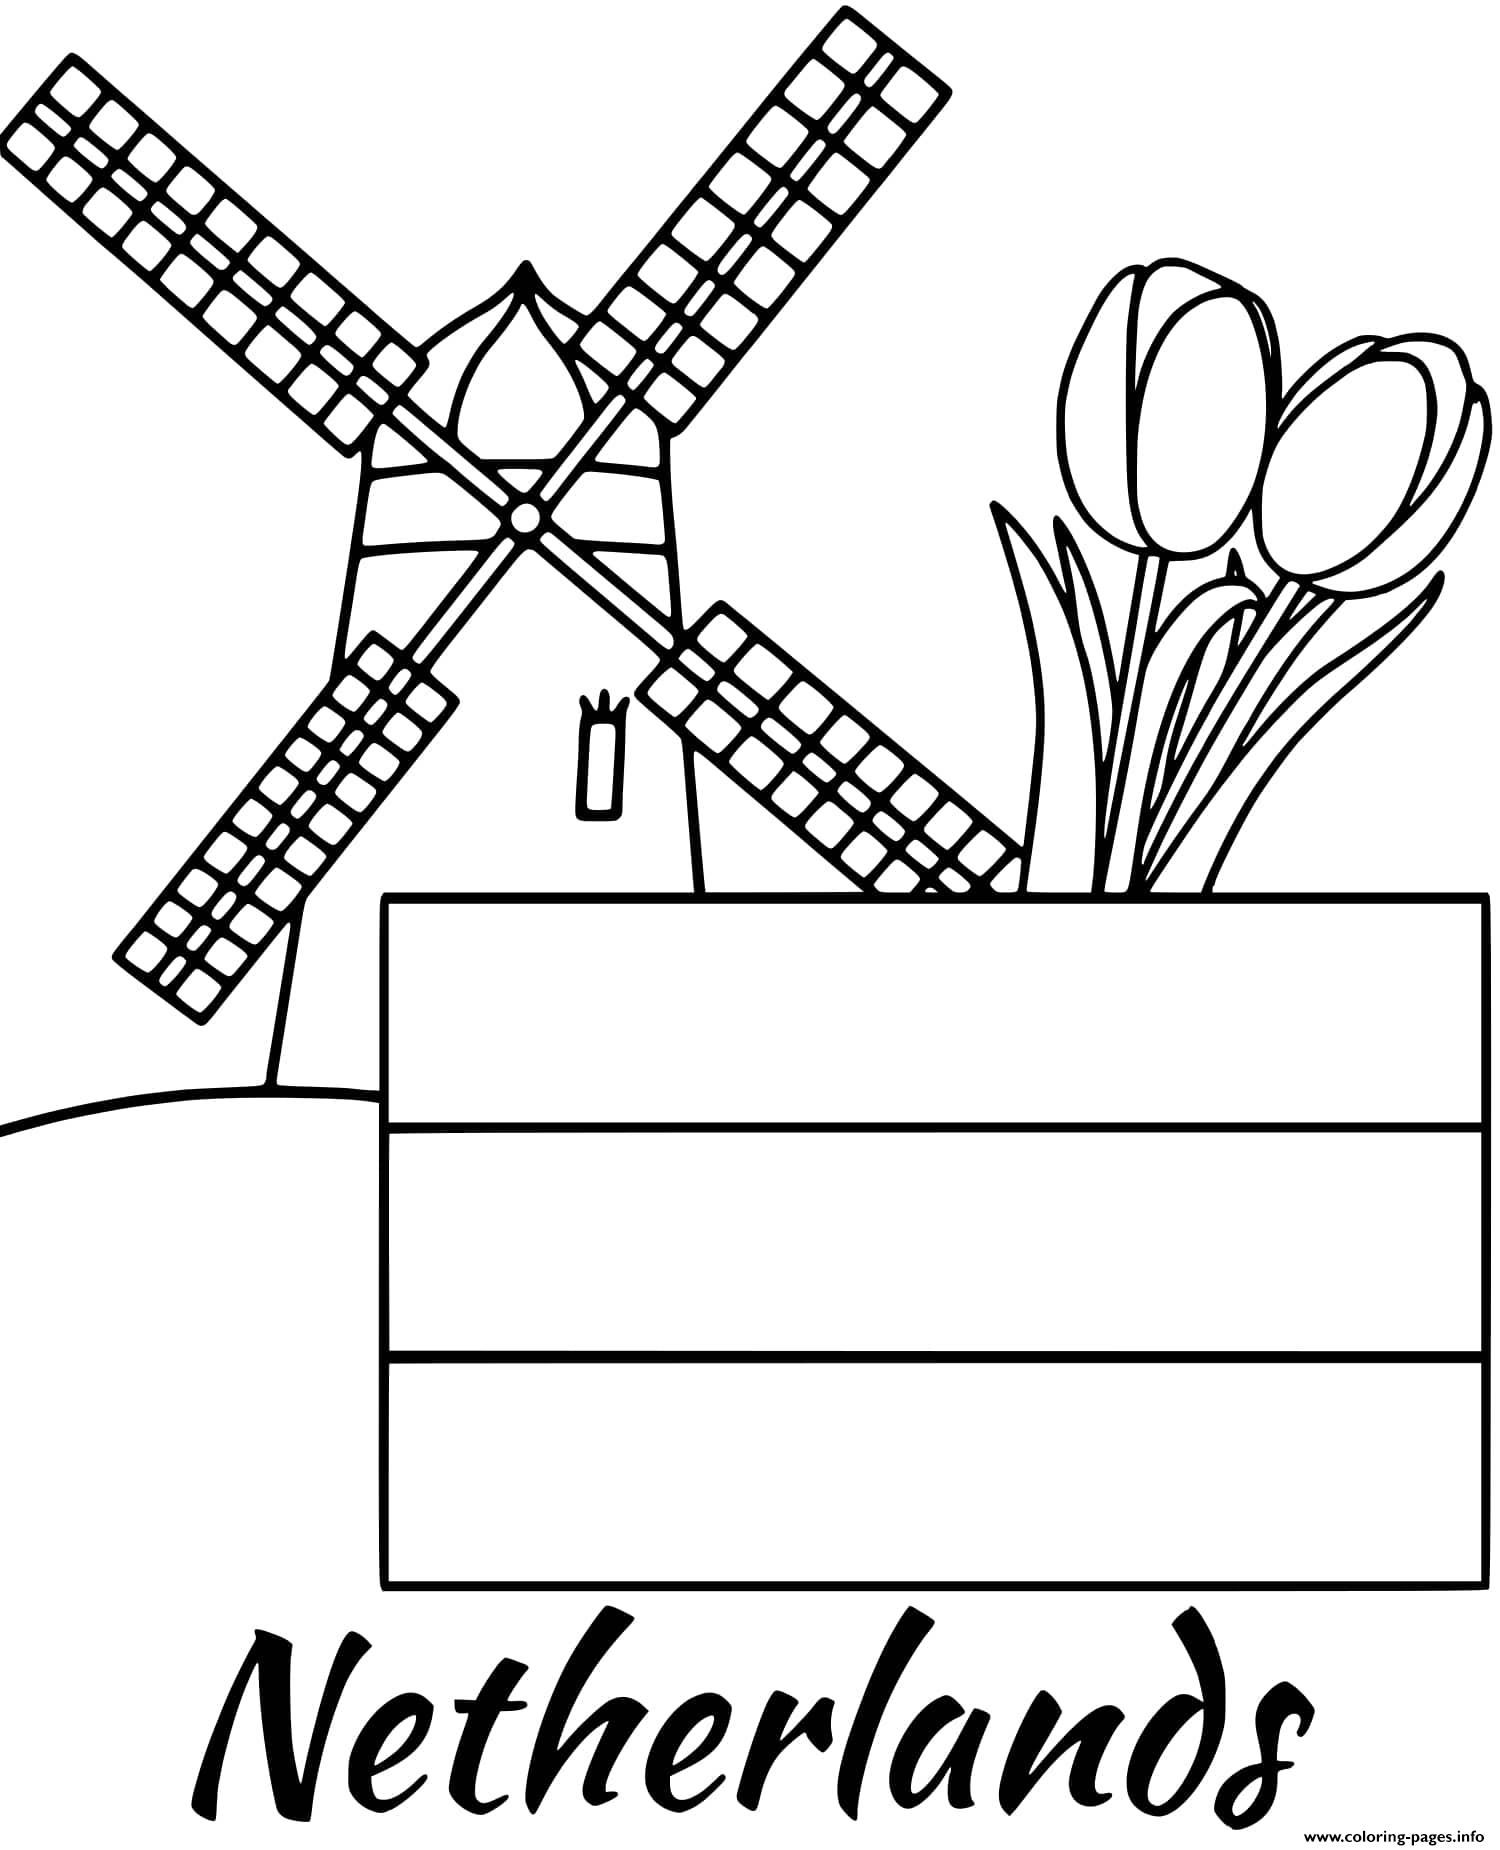 Print netherlands flag windmill coloring pages coloring pages netherlands flag star wars coloring book